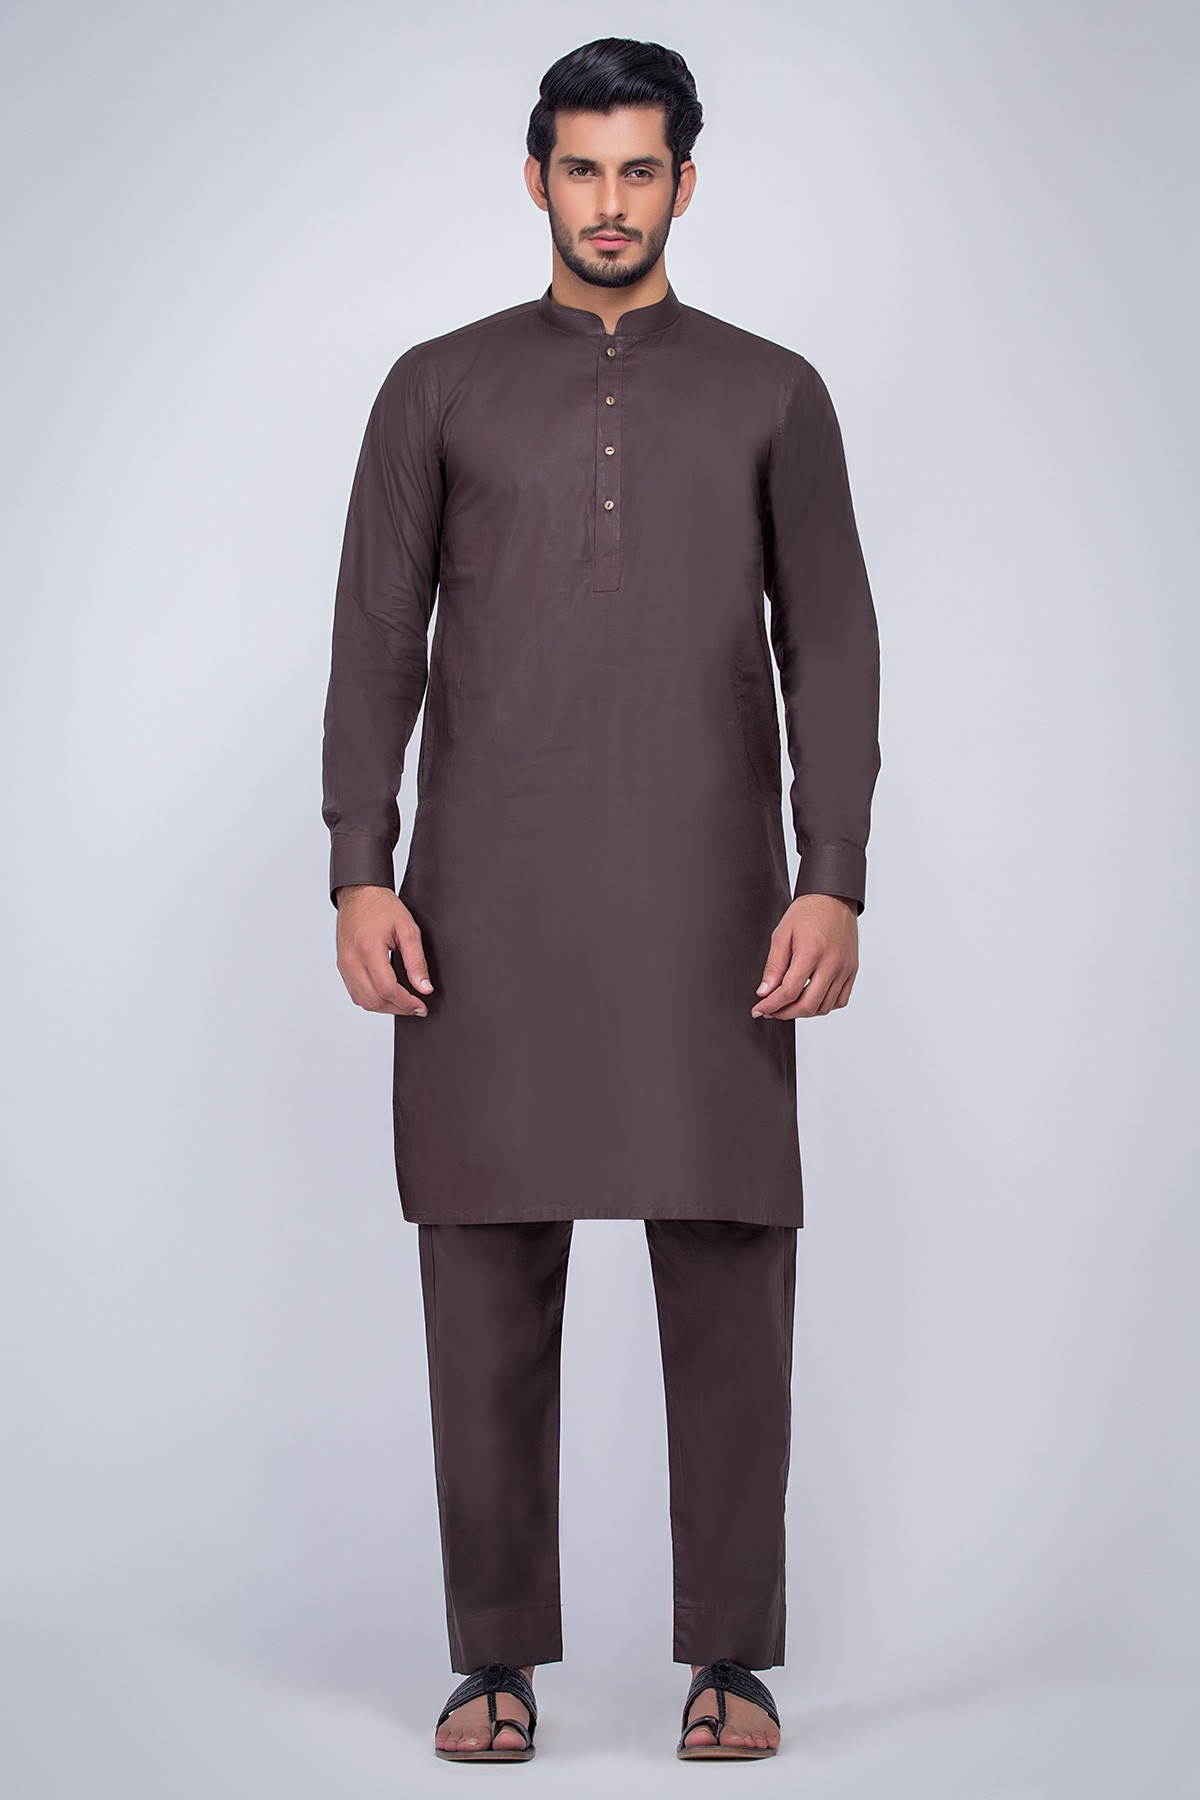 Limelight Eid Collection for men